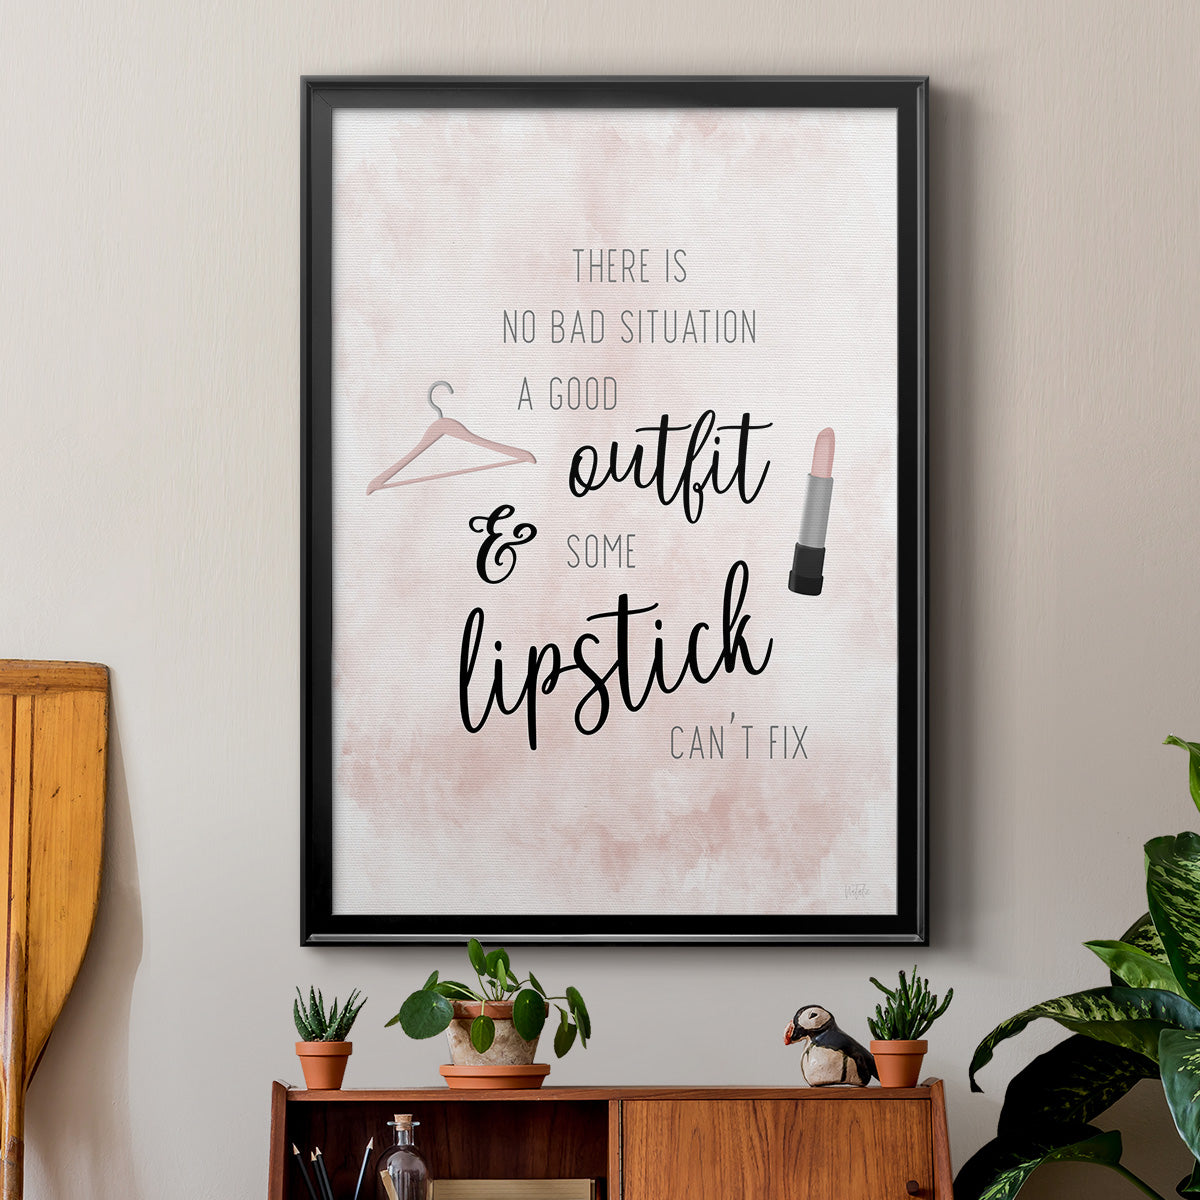 Outfit and Lipstick Premium Framed Print - Ready to Hang